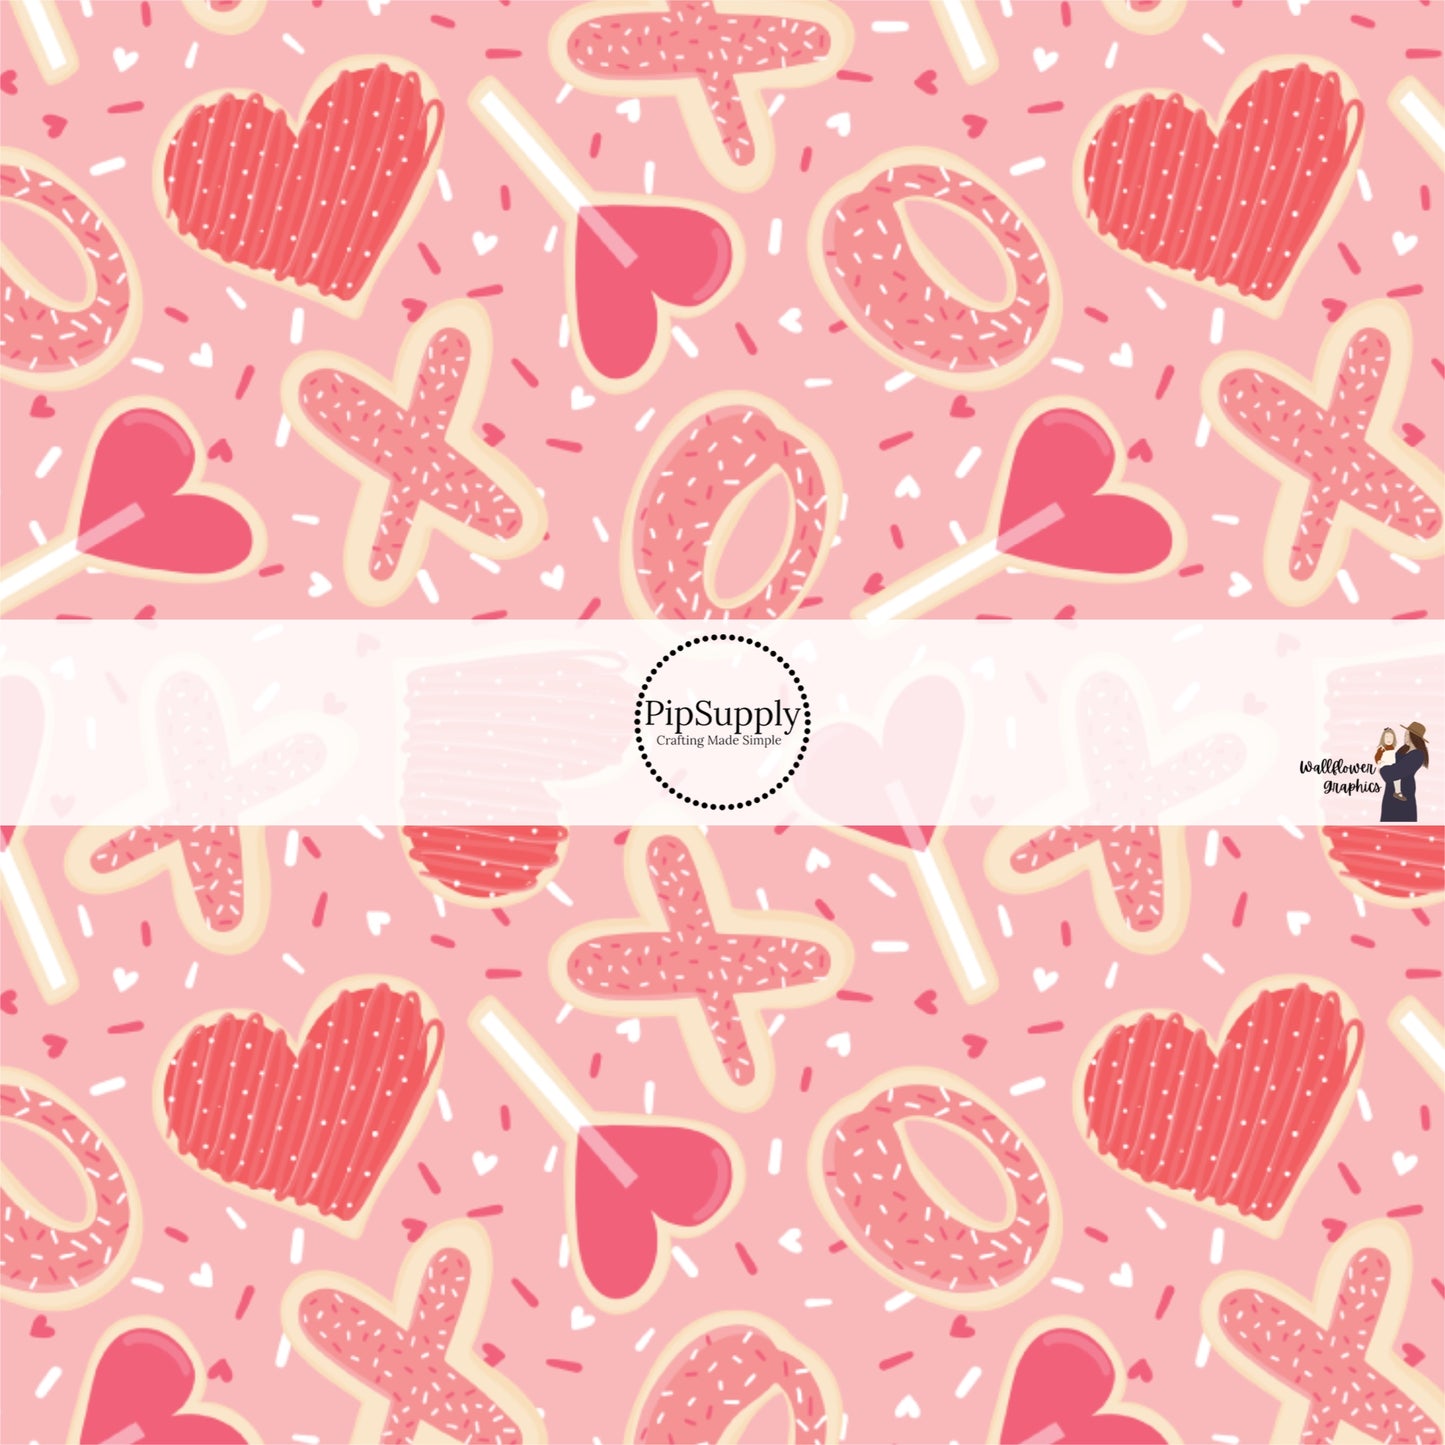 Valentine Print Fabric-Simple Hearts Pink on White